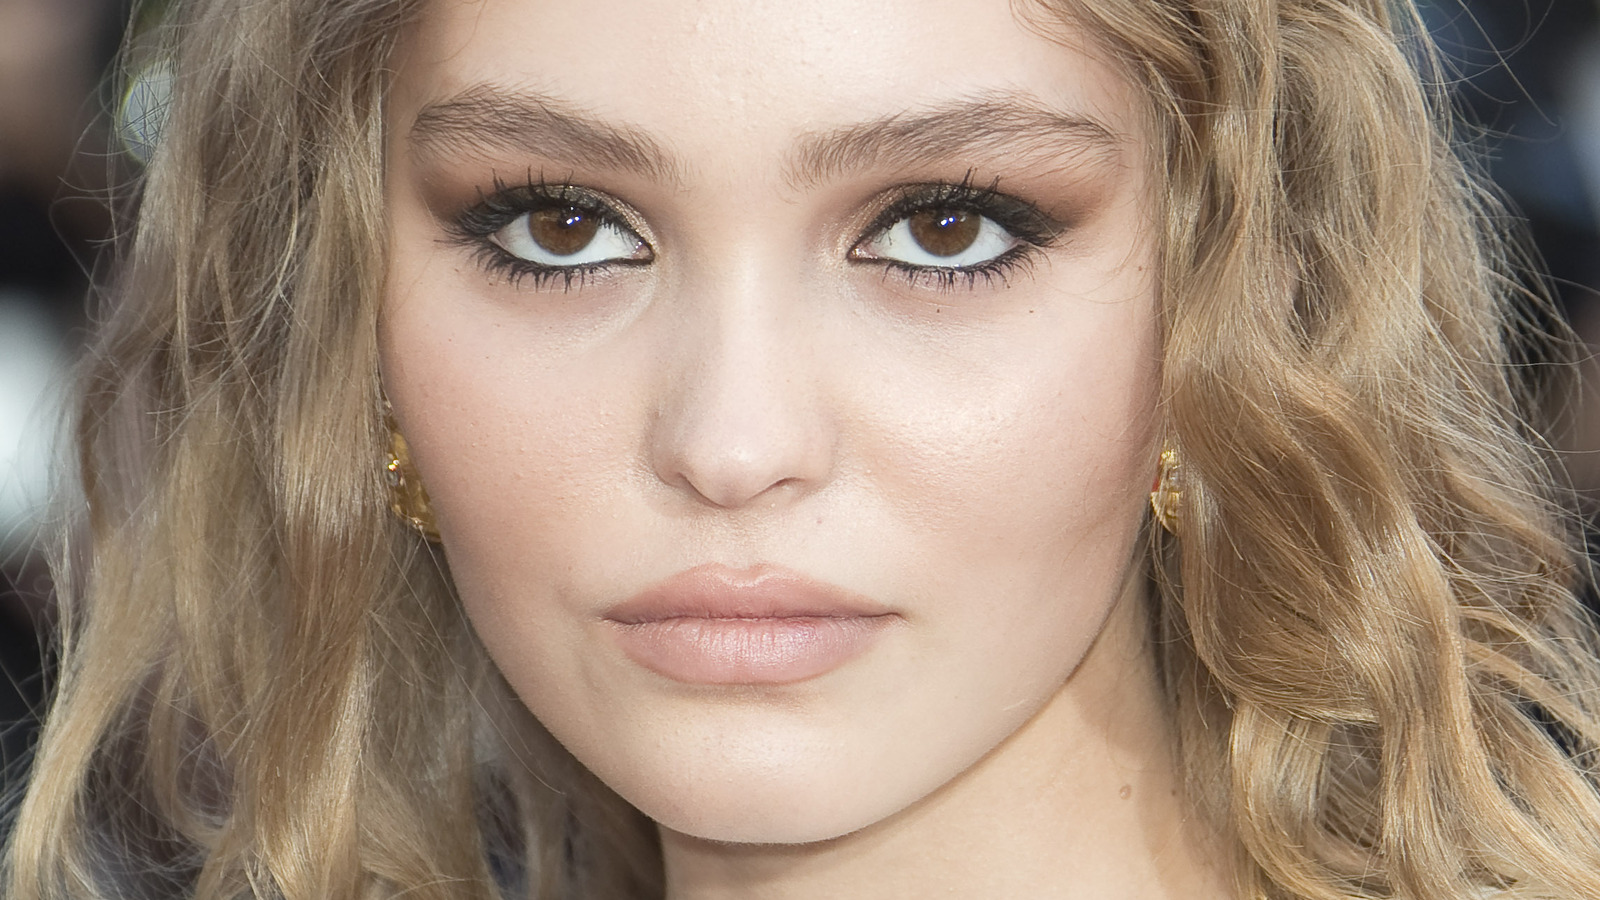 How To Recreate LilyRose Depps Smoky Eye In 3 Easy Steps According To  Her Makeup Artist